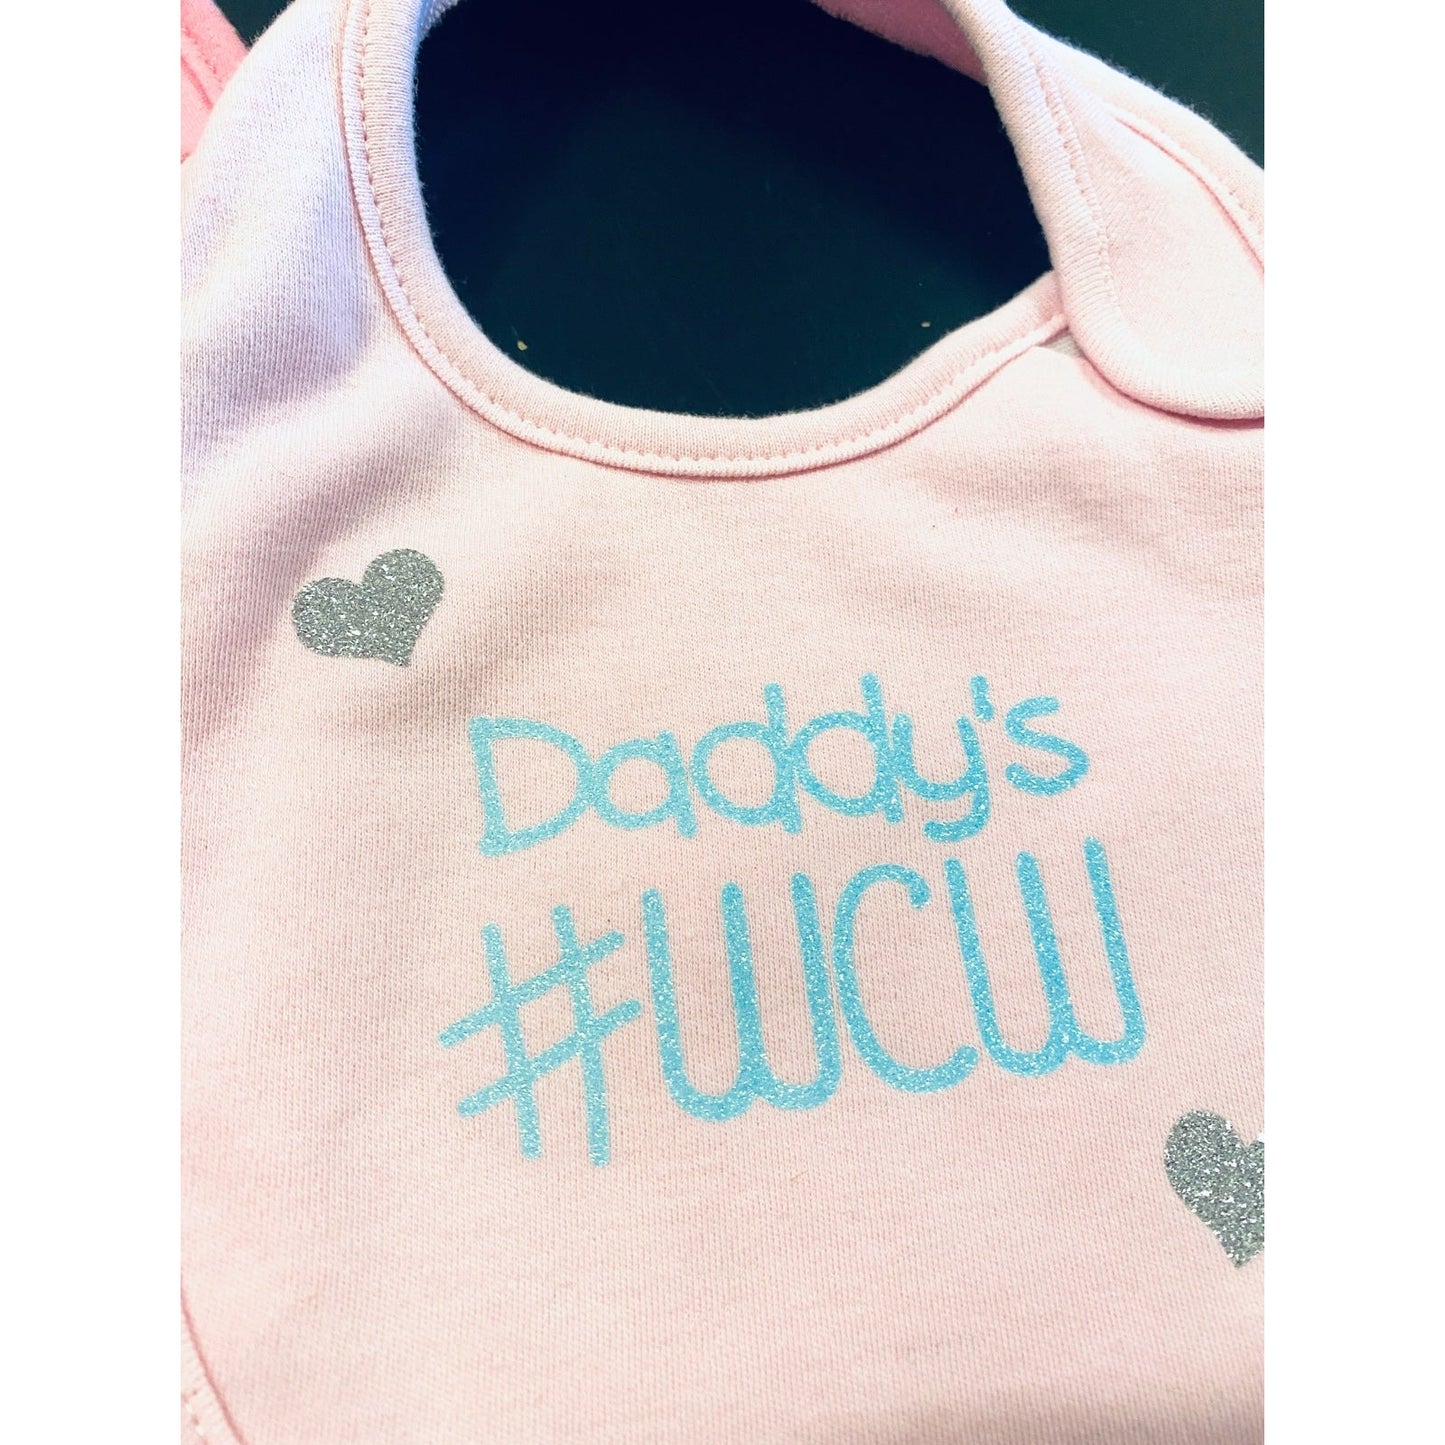 New Daddy’s #wcw Baby bibs gift set